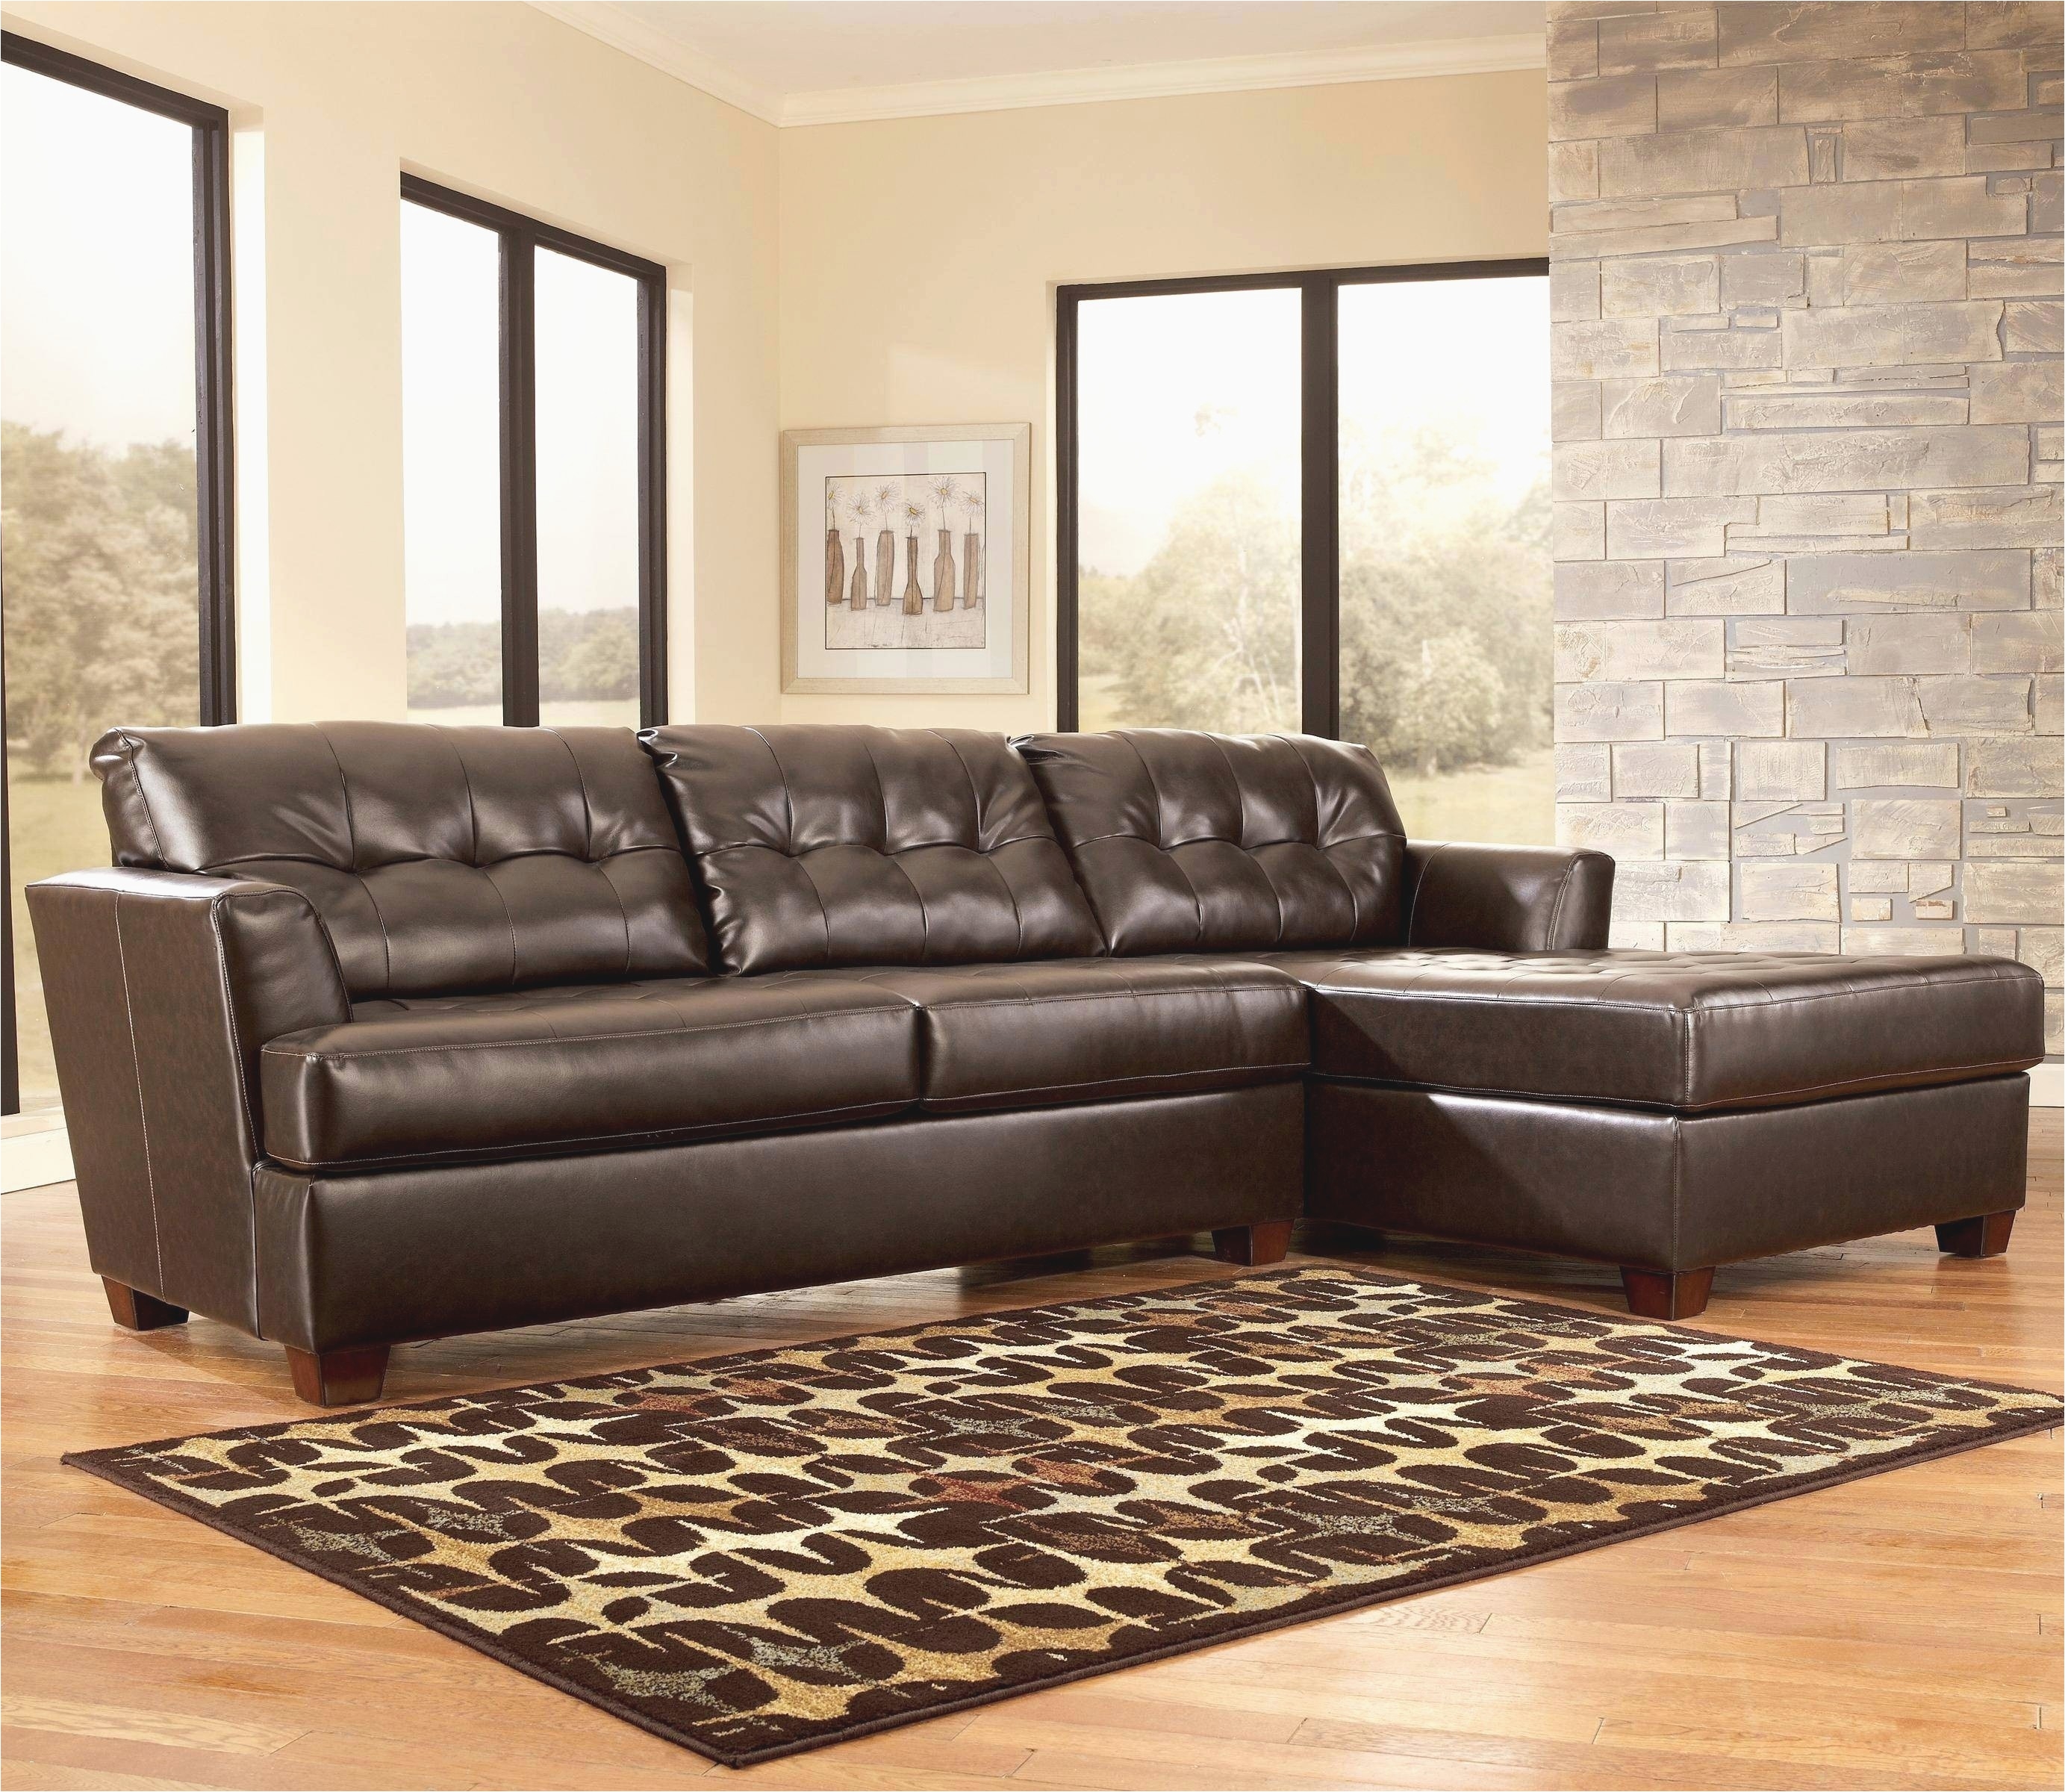 Ashley Furniture Humble Best 28 ashley Furniture Leather Couch Home Furniture Ideas